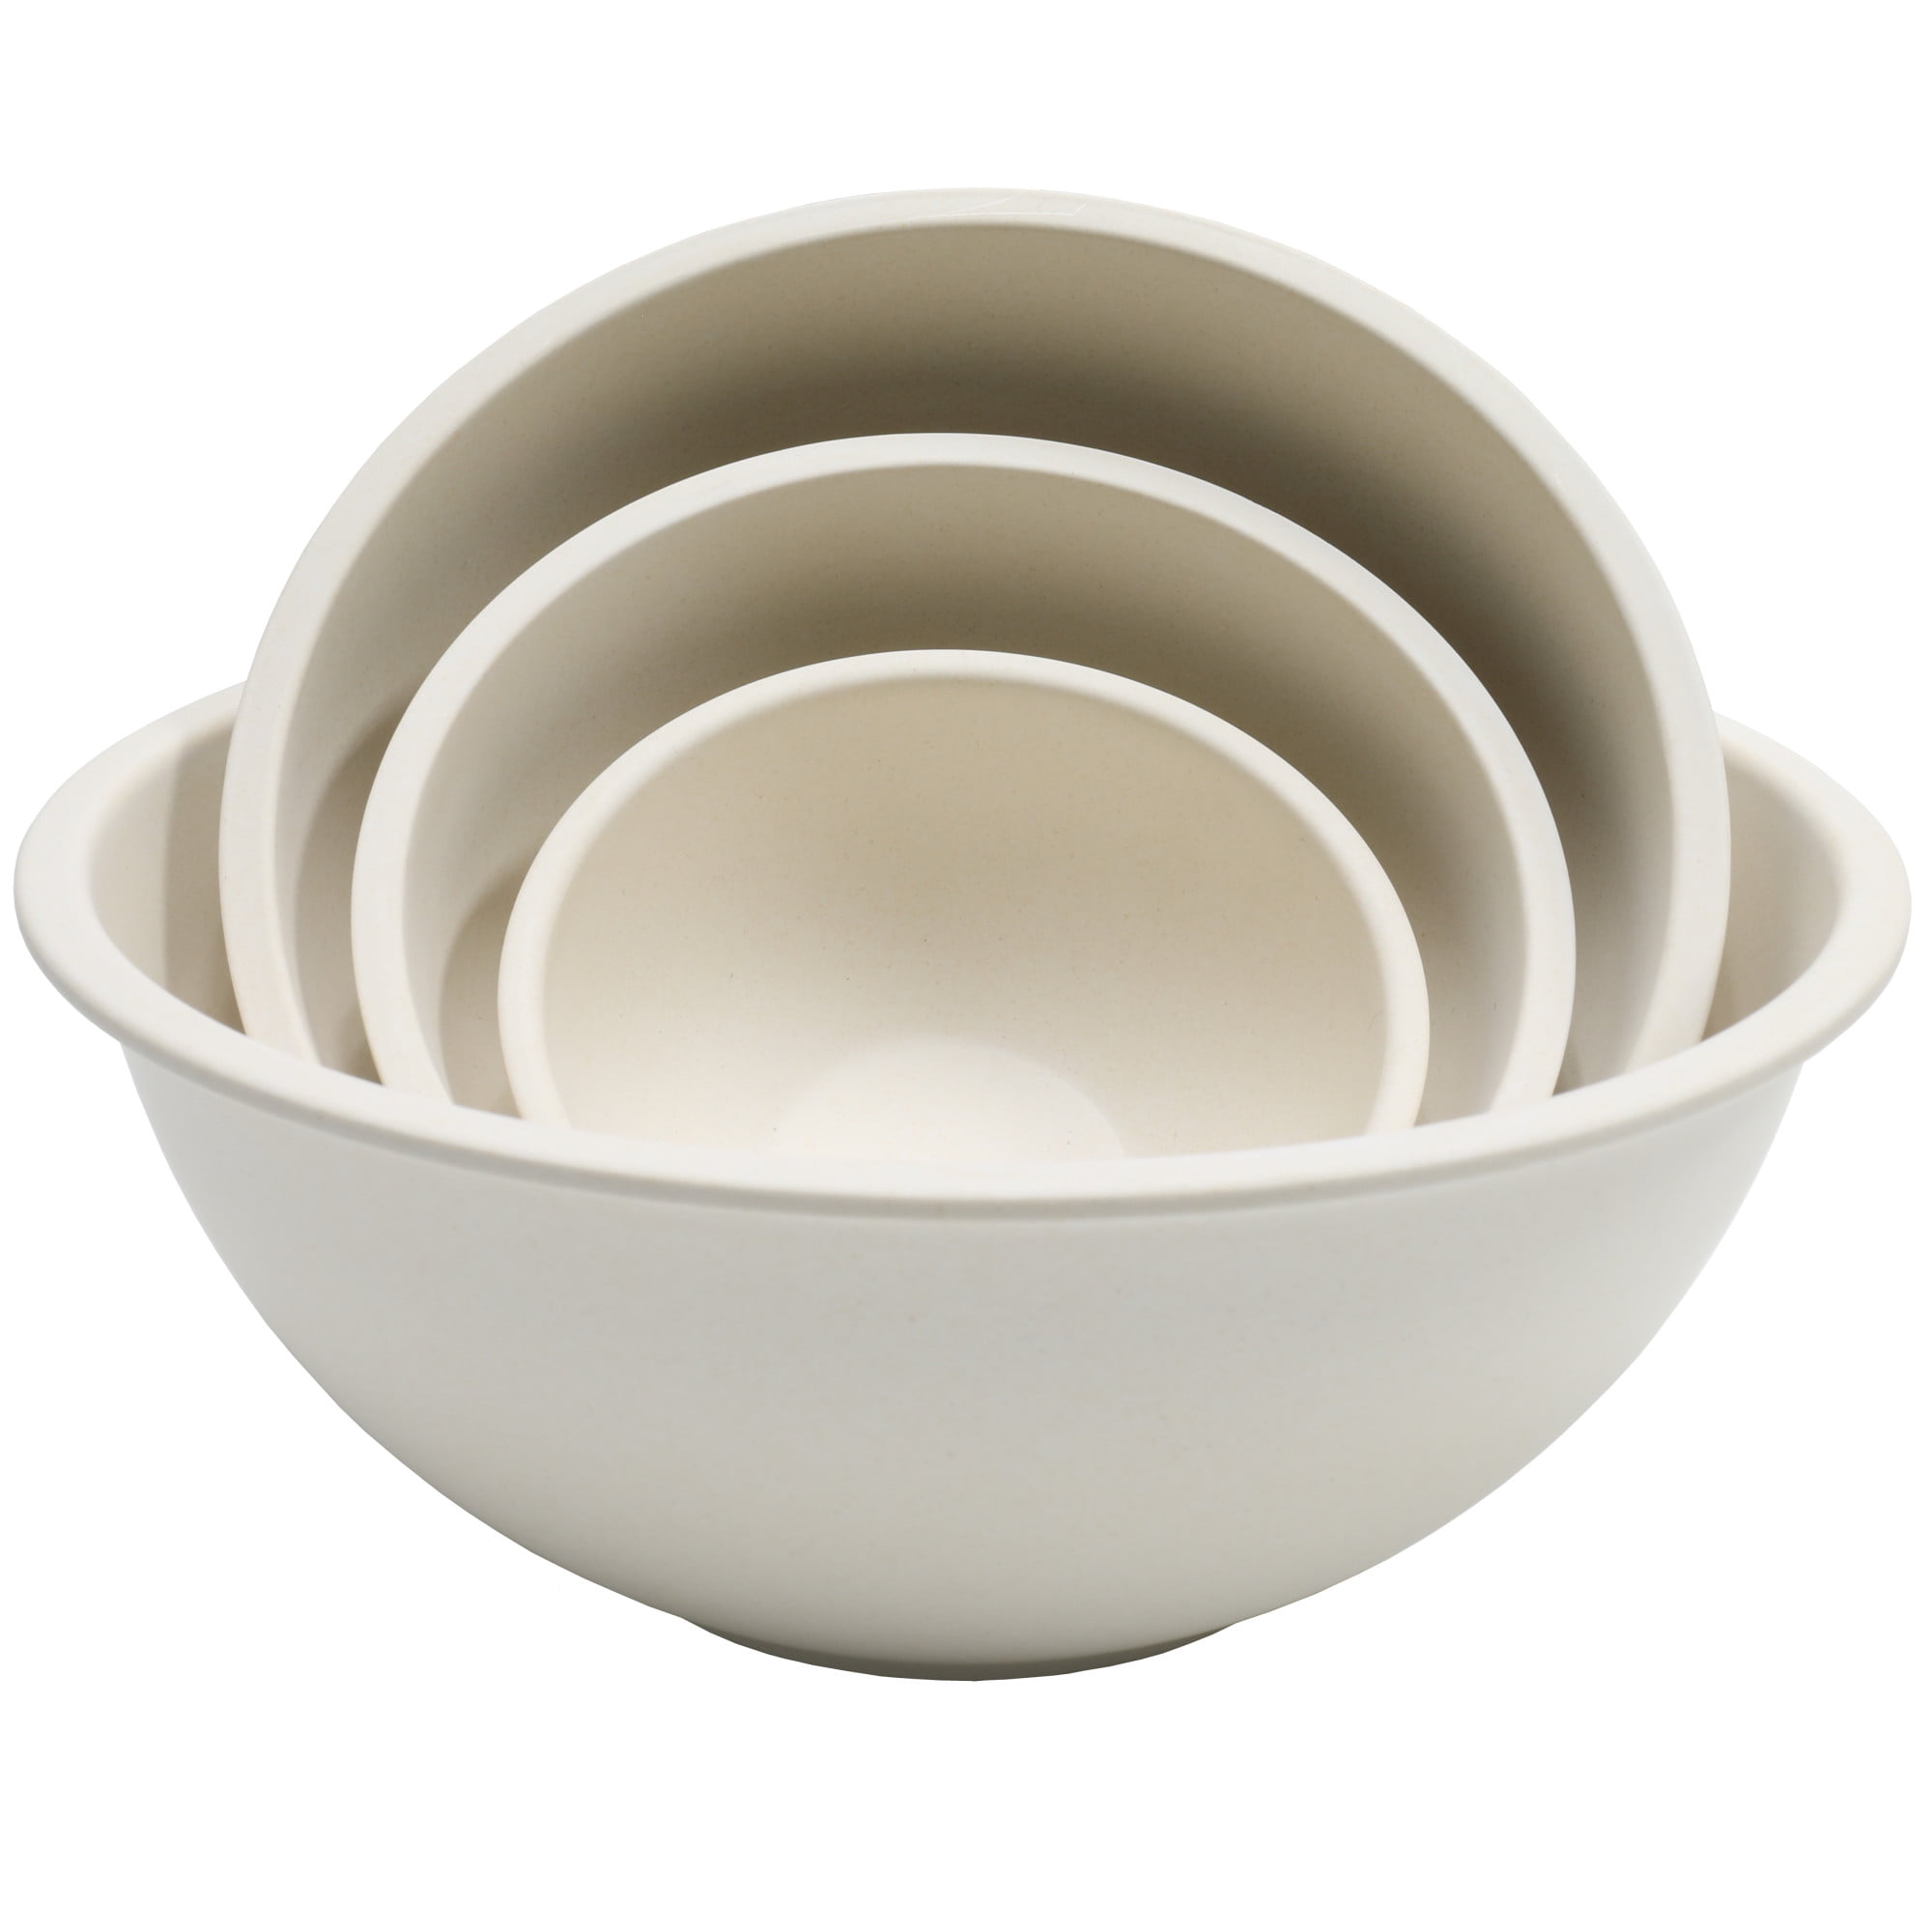  Chef Craft Brushed Mixing Bowl, 1-Quart, Stainless